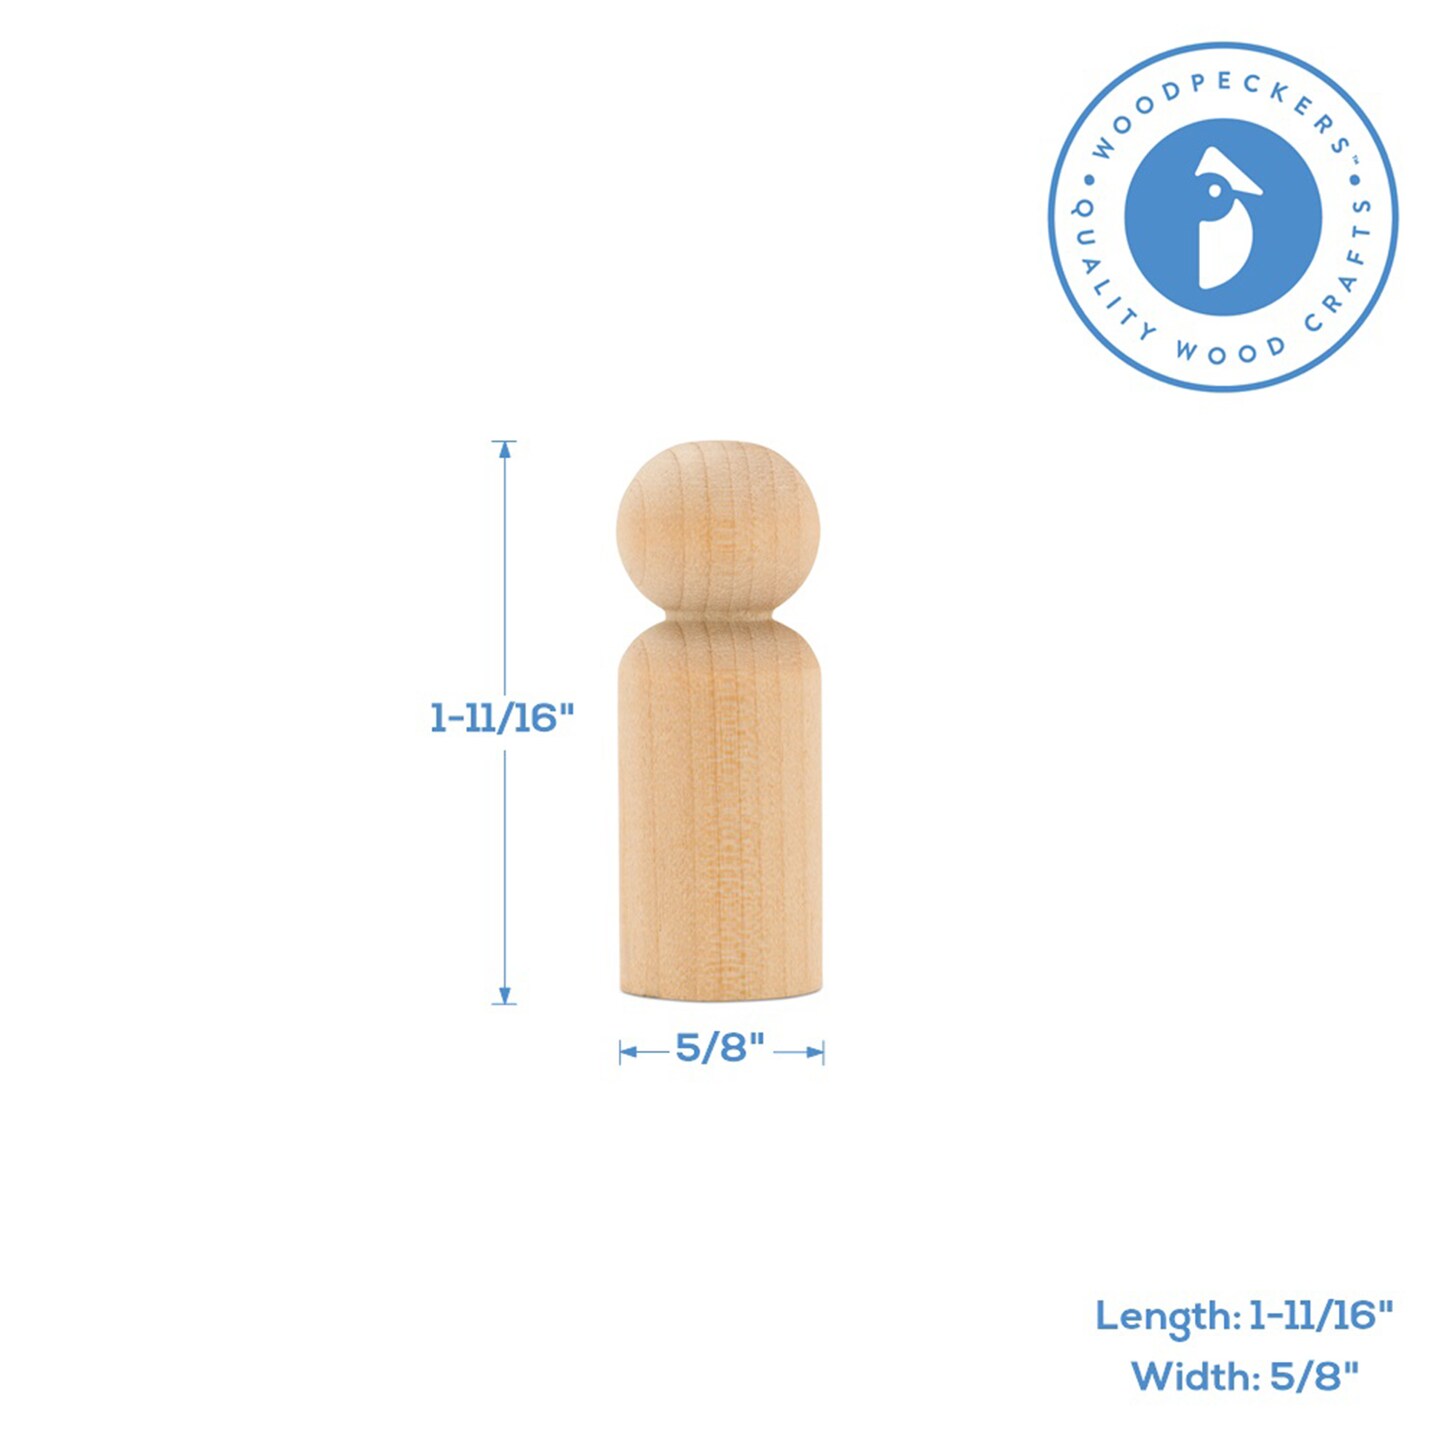 Small Wooden Peg Doll People Unfinished, 1-11/16 inch Boy Shape | Woodpeckers